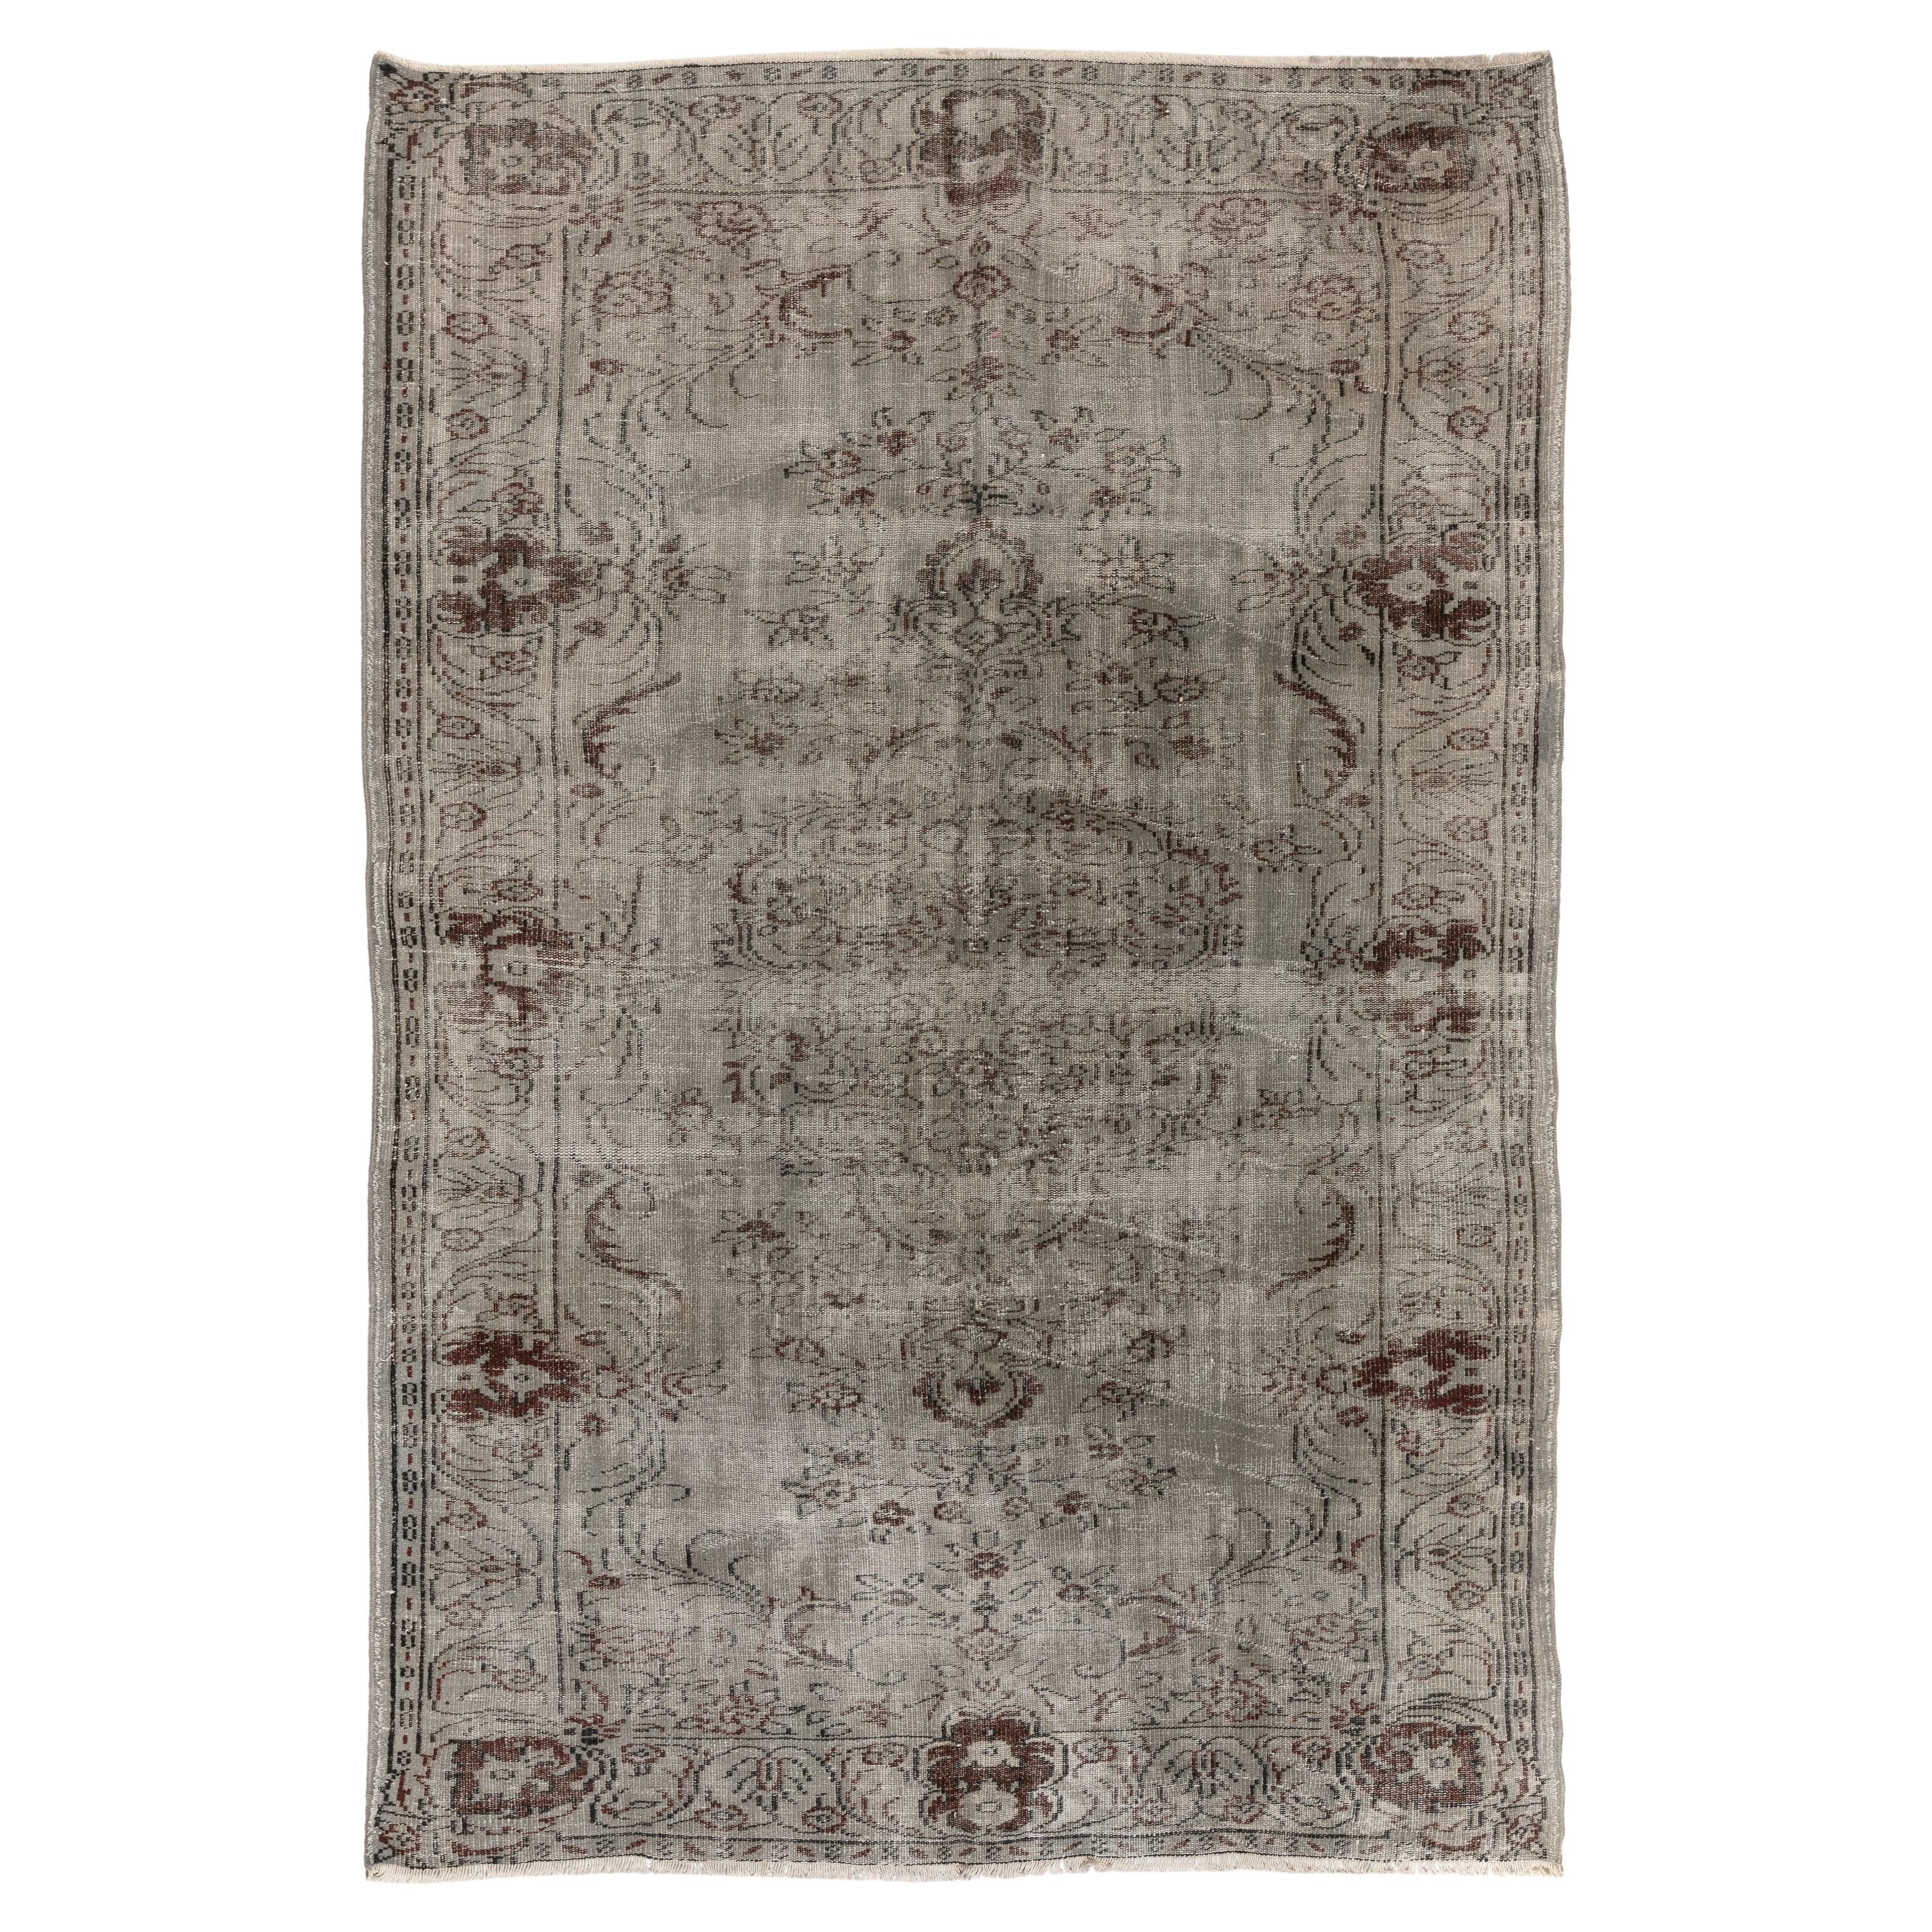 6.3x9 ft Vintage Handmade Turkish Area Rug in Gray with Floral Medallion Design